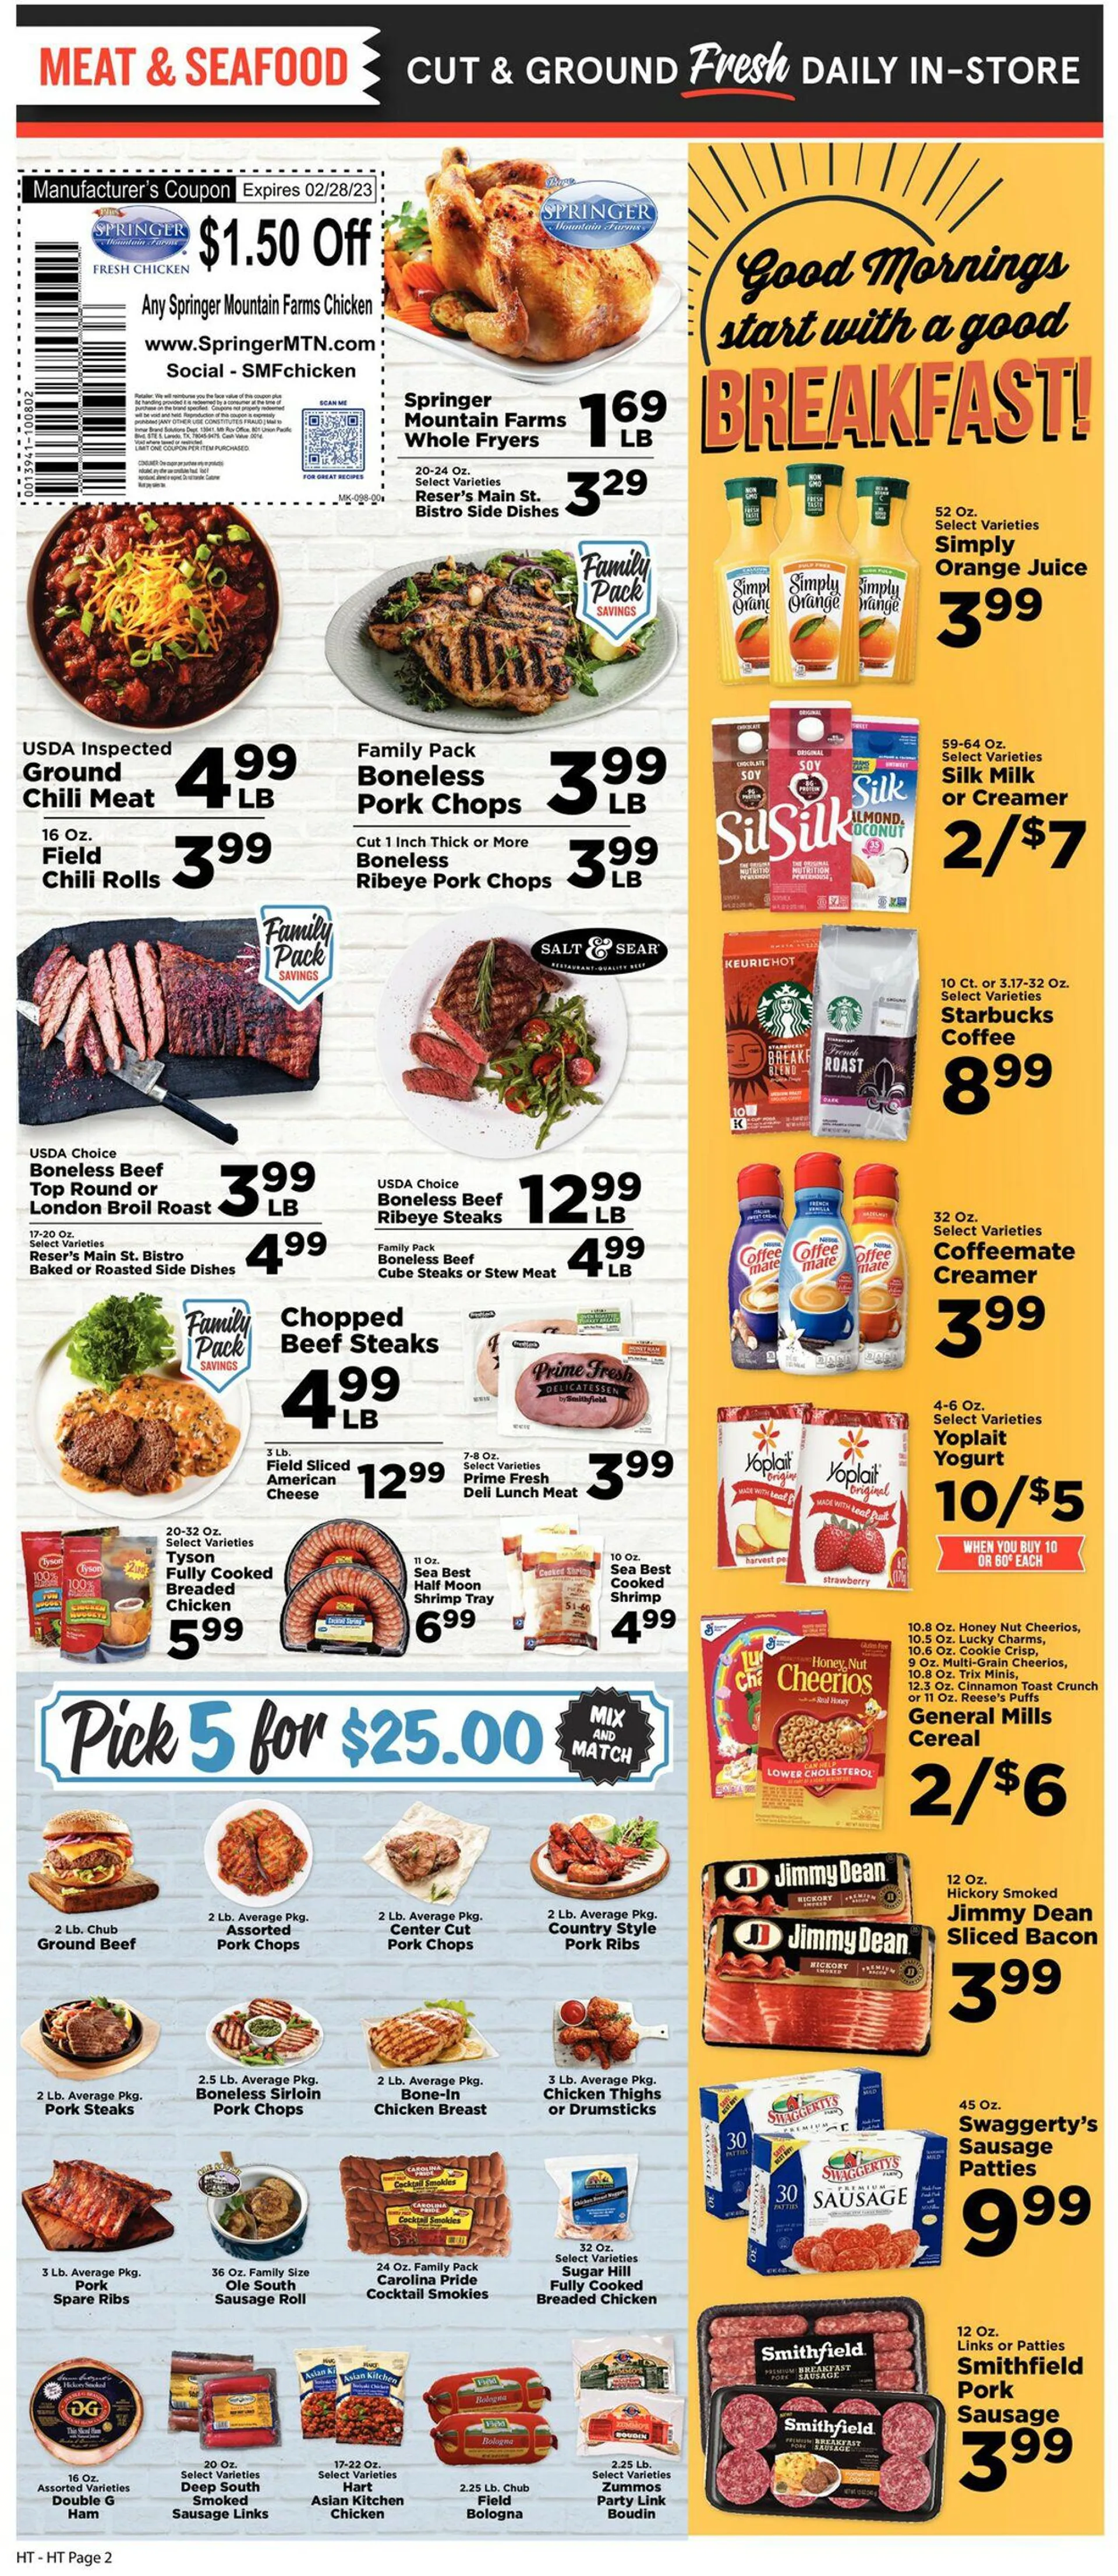 Hometown Market Current weekly ad - 2